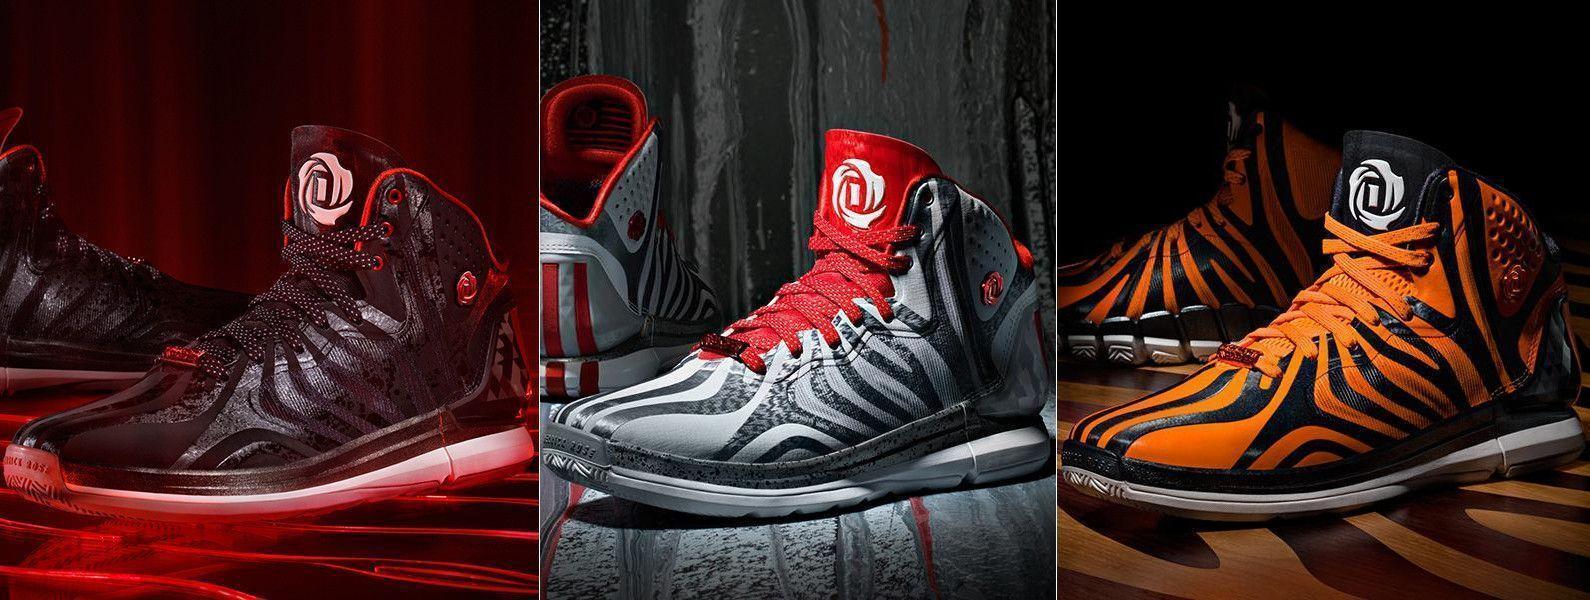 adidas Unveils The D Rose 4. New Sneaker For Derrick Rose